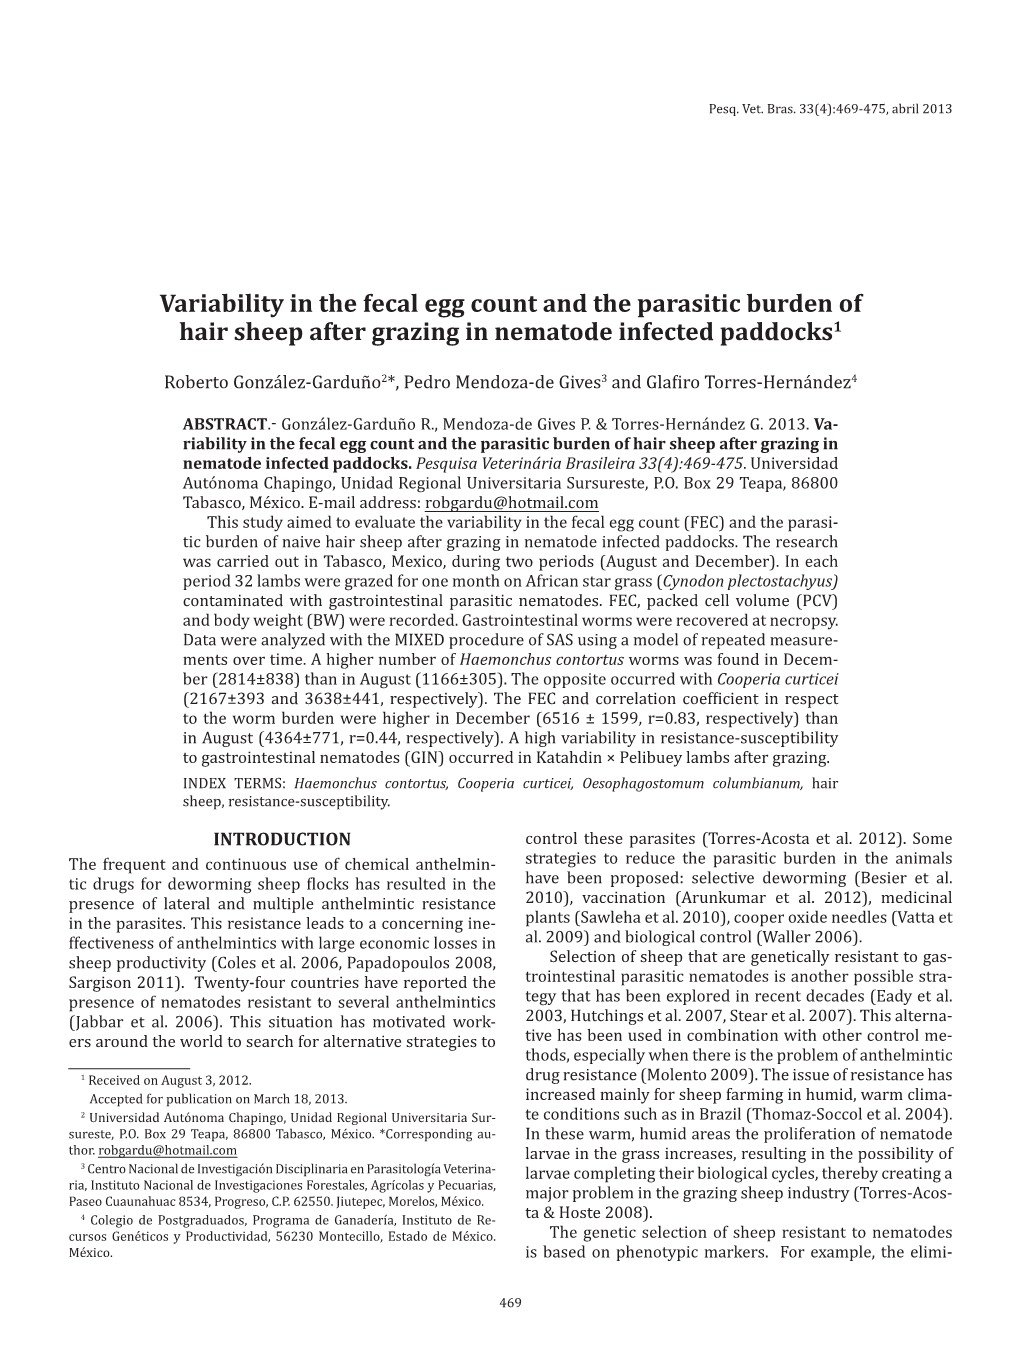 Variability in the Fecal Egg Count and the Parasitic Burden of Hair Sheep After Grazing in Nematode Infected Paddocks1